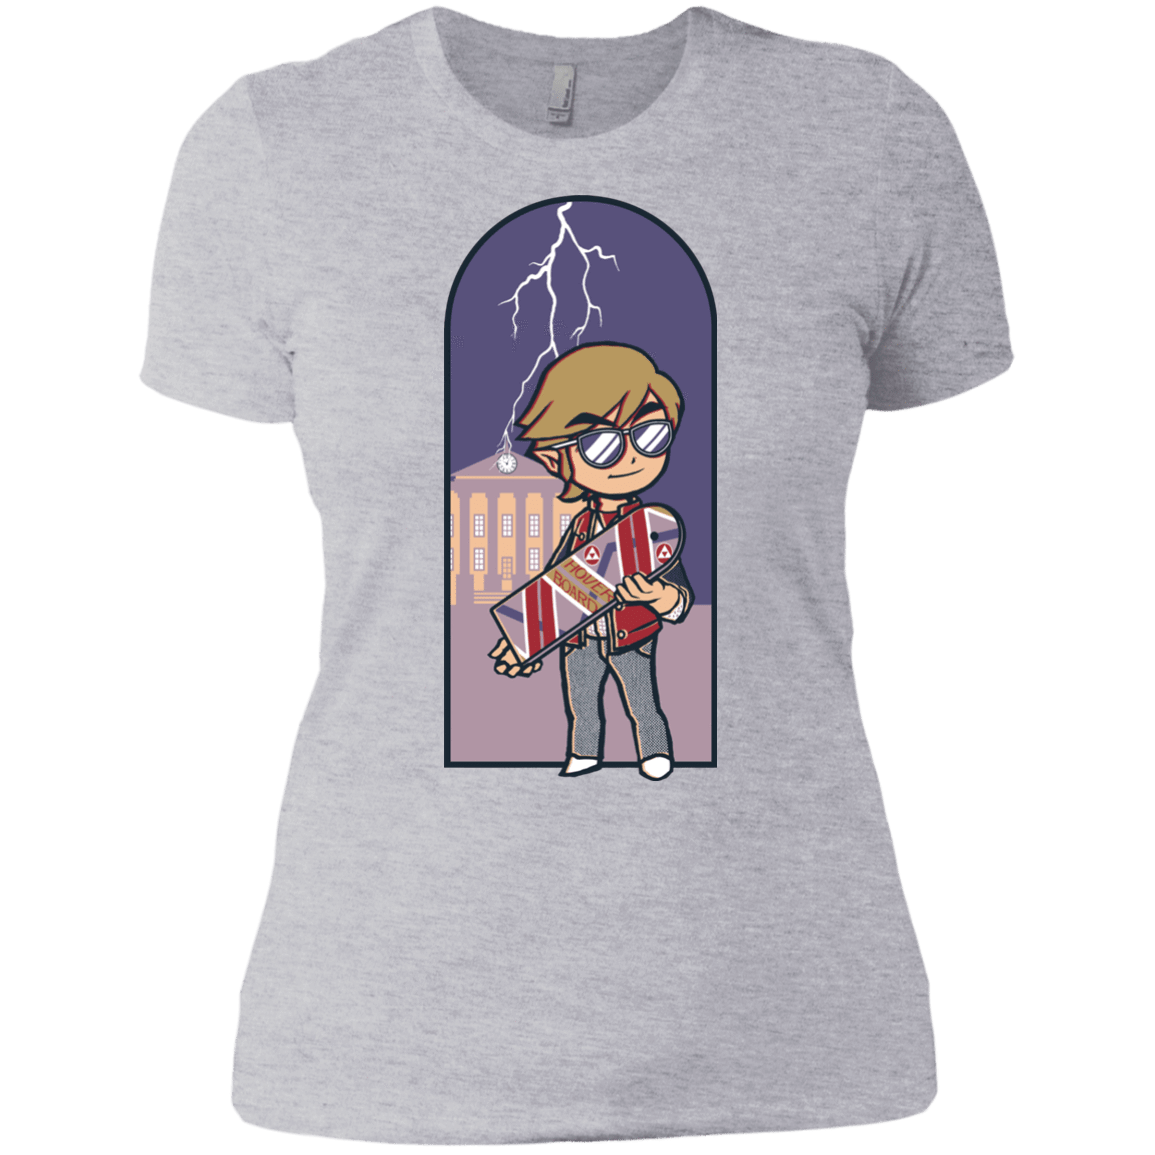 T-Shirts Heather Grey / X-Small A Link to The Future Women's Premium T-Shirt